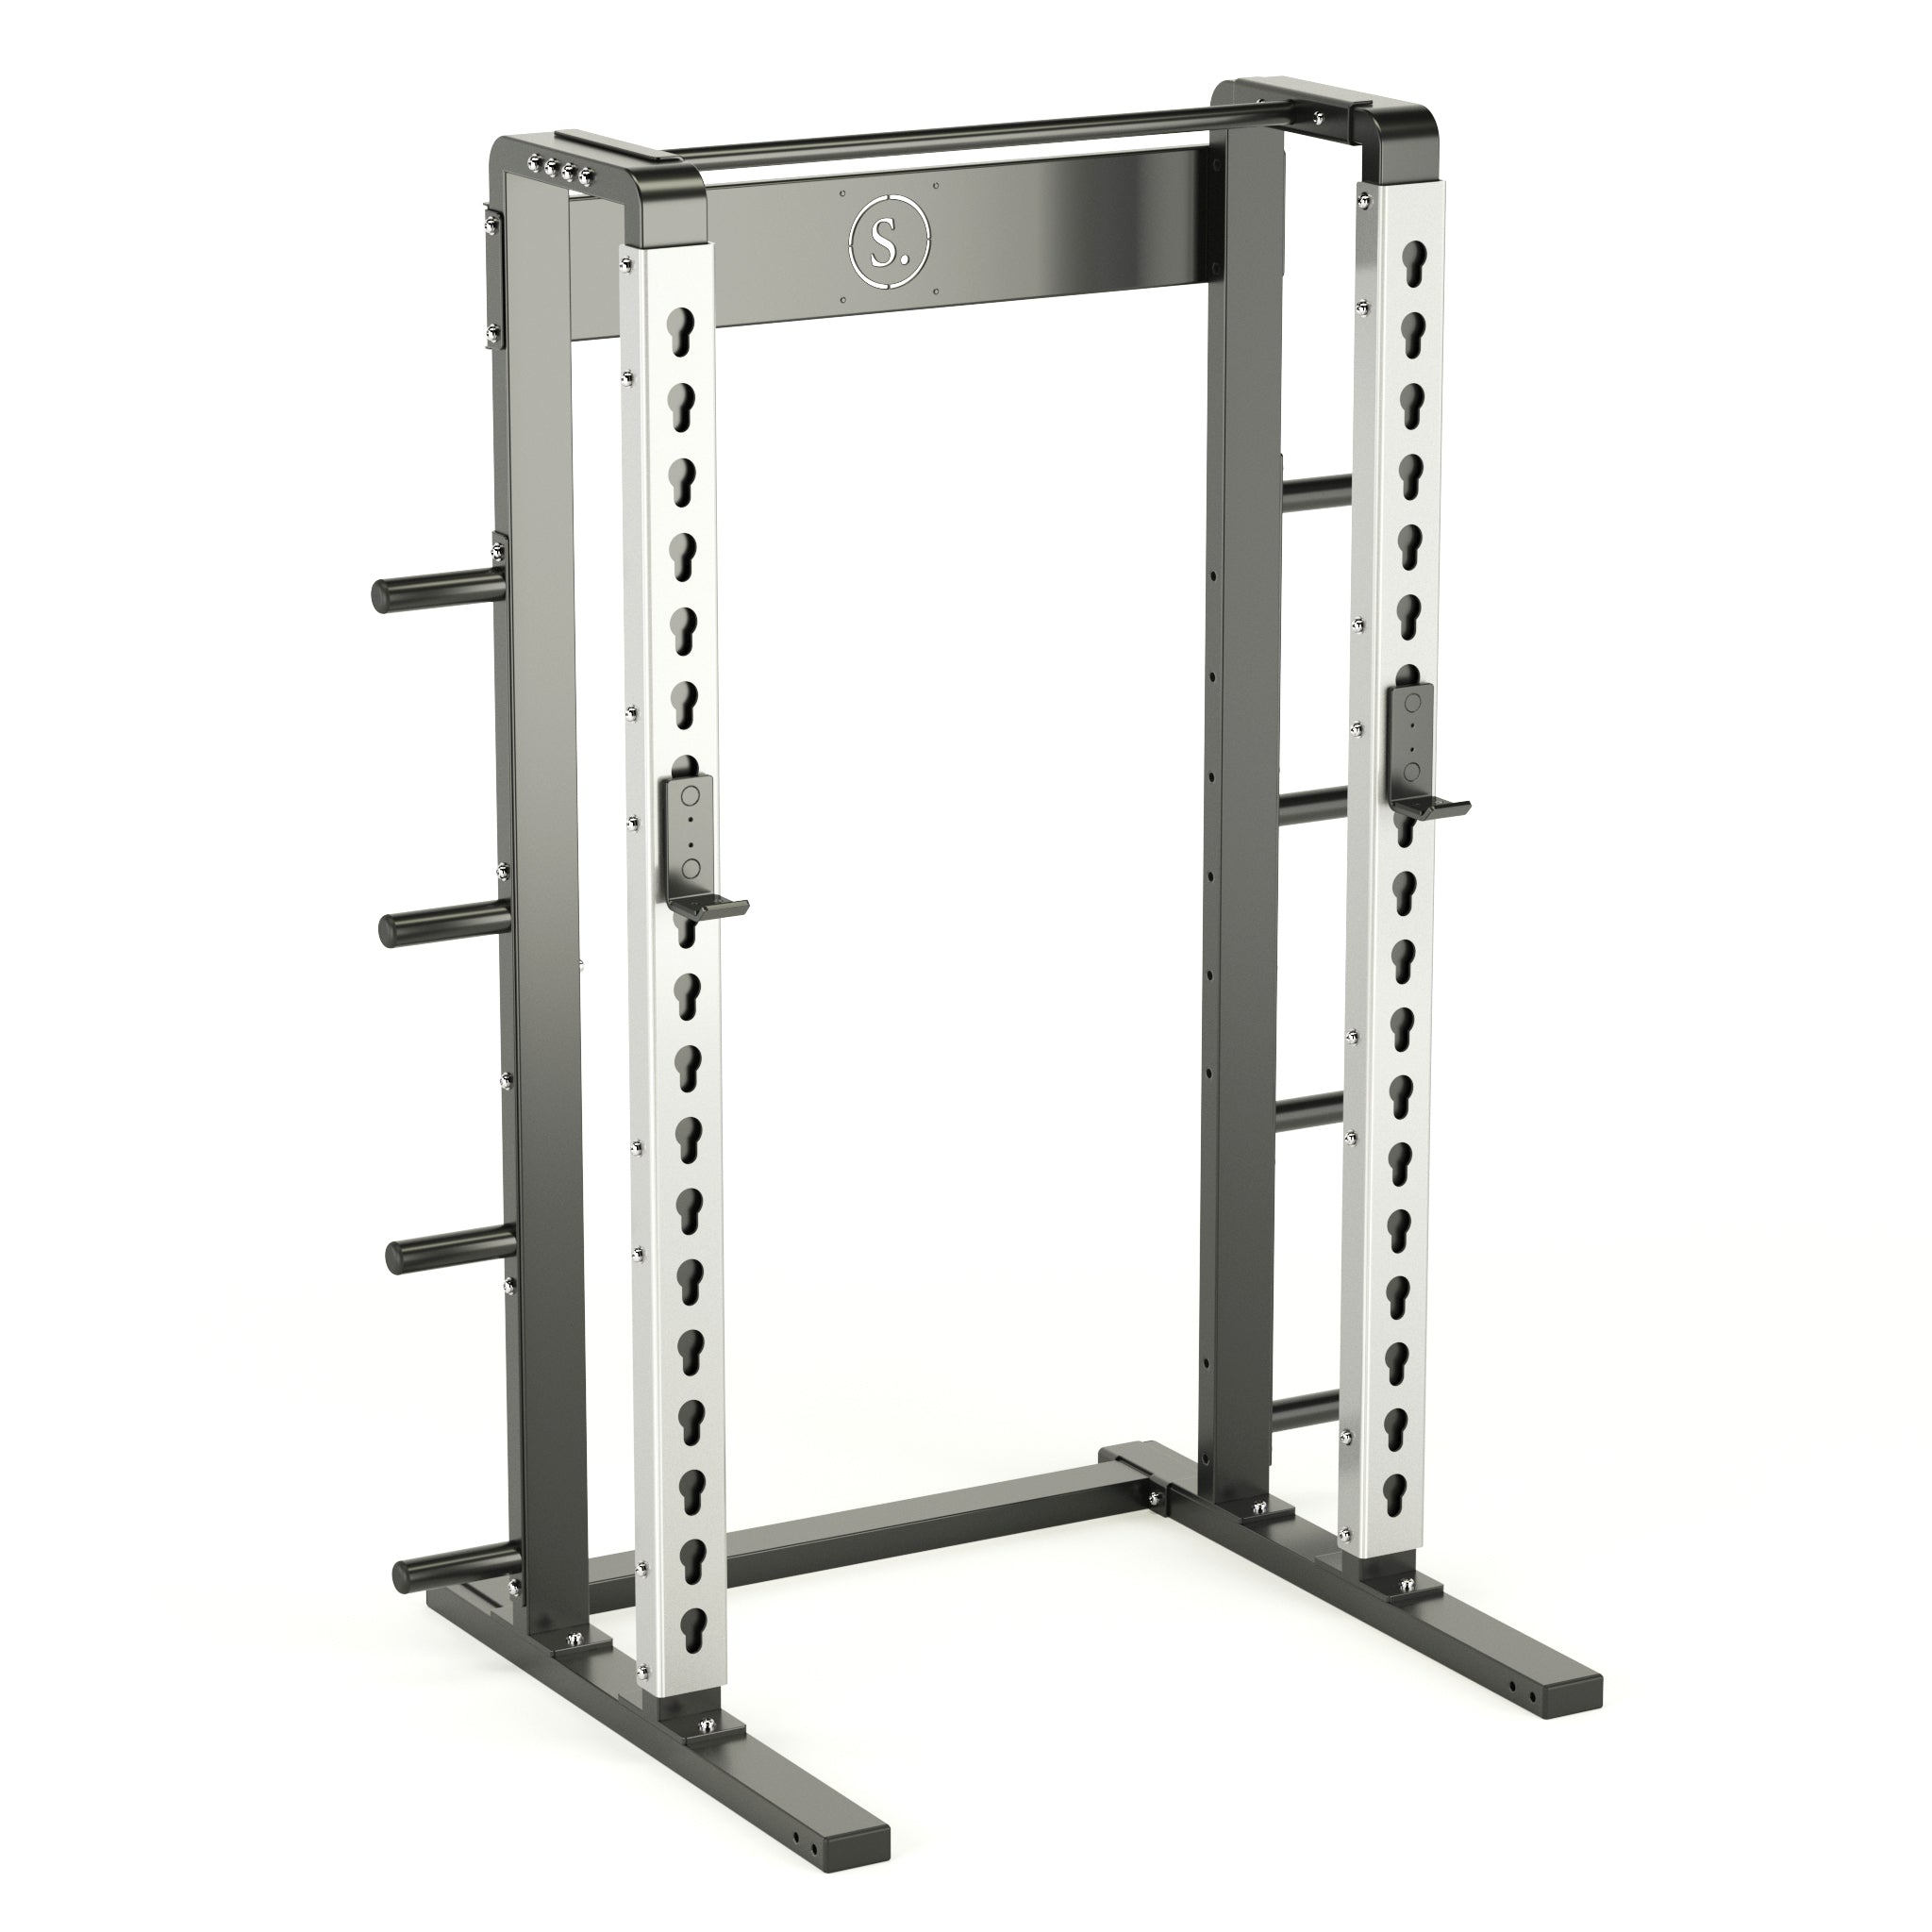 Solo Squat Rack in silver with weight horns